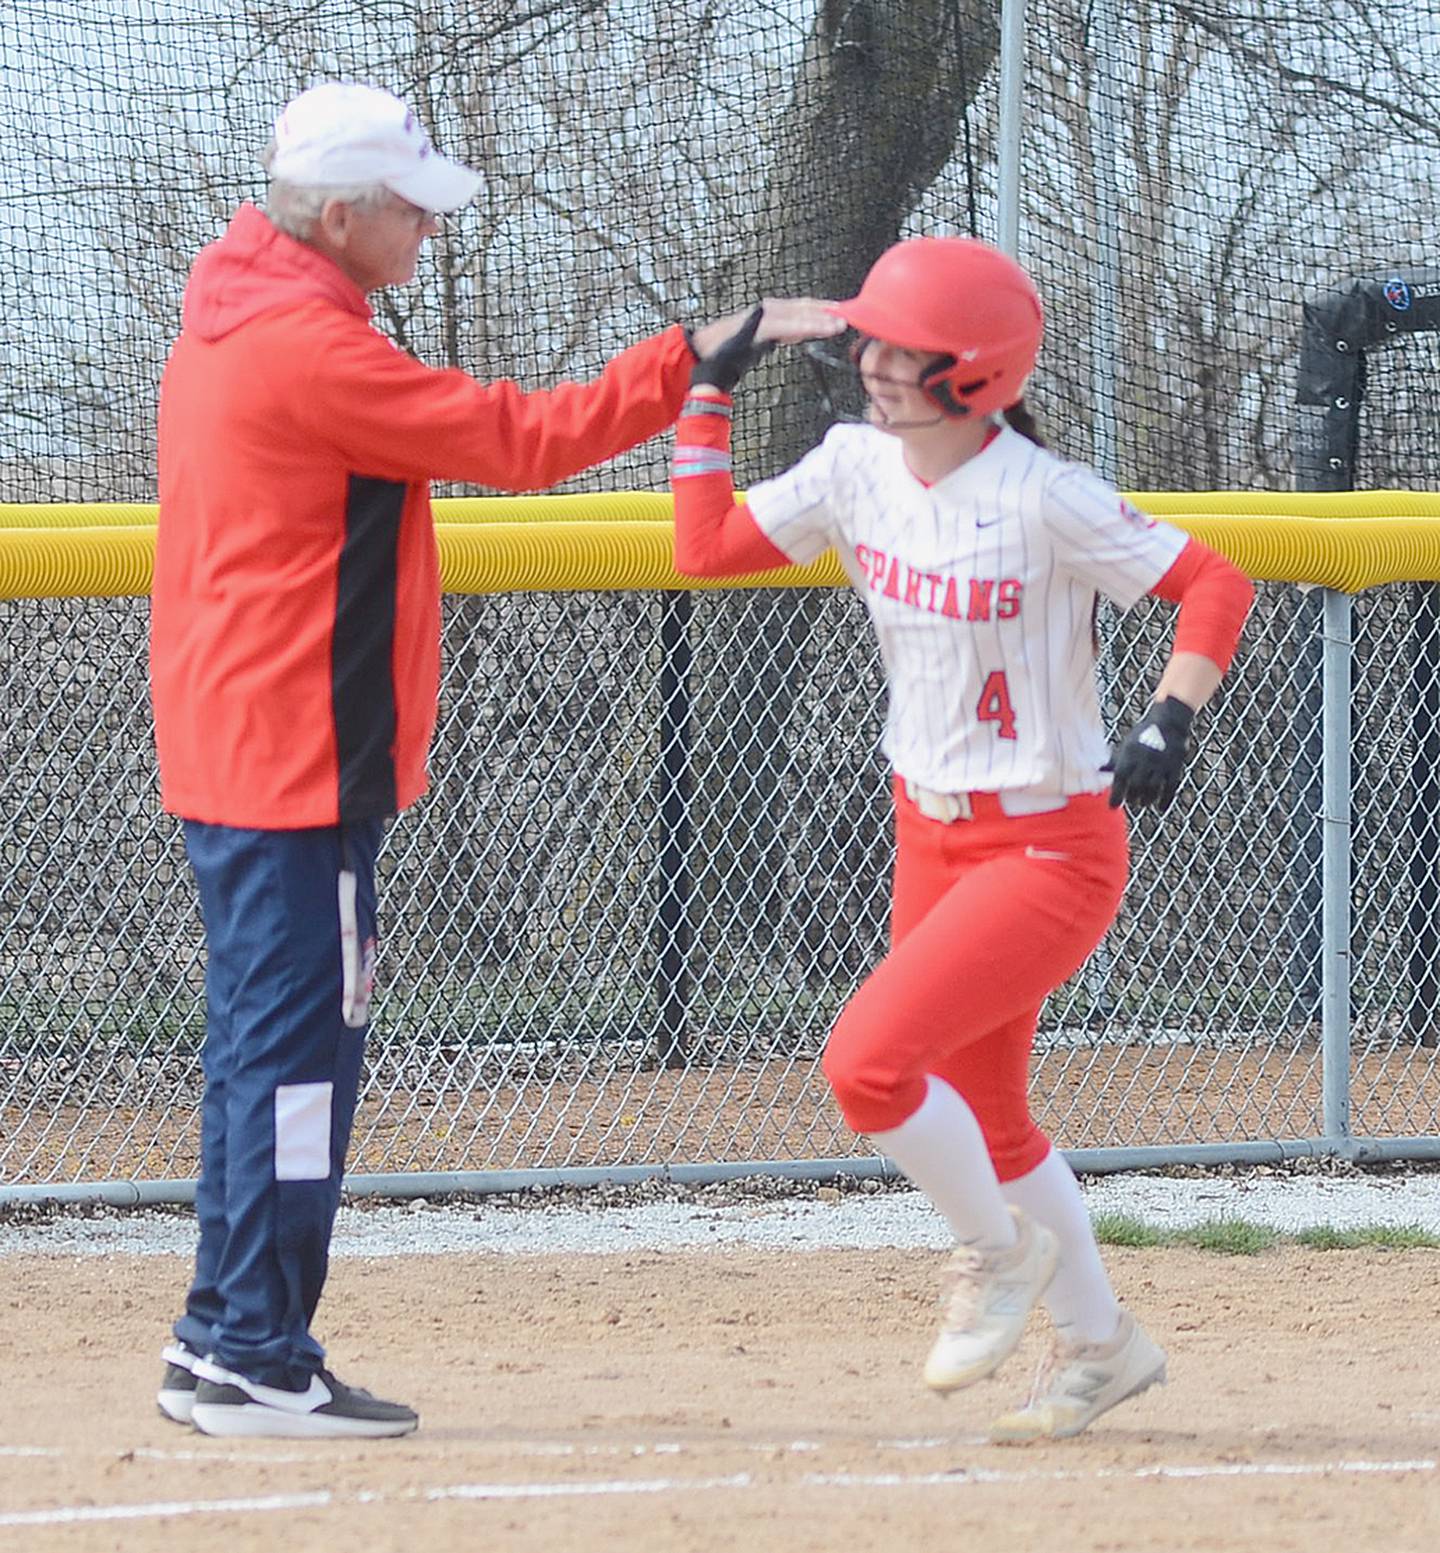 Southwestern coach Danny Jensen gives a "high five" to third baseman Ashton Willis (4) after her two-run home run in the seventh inning of Friday's 7-5 loss to Marshalltown. Willis had five hits in the two games.